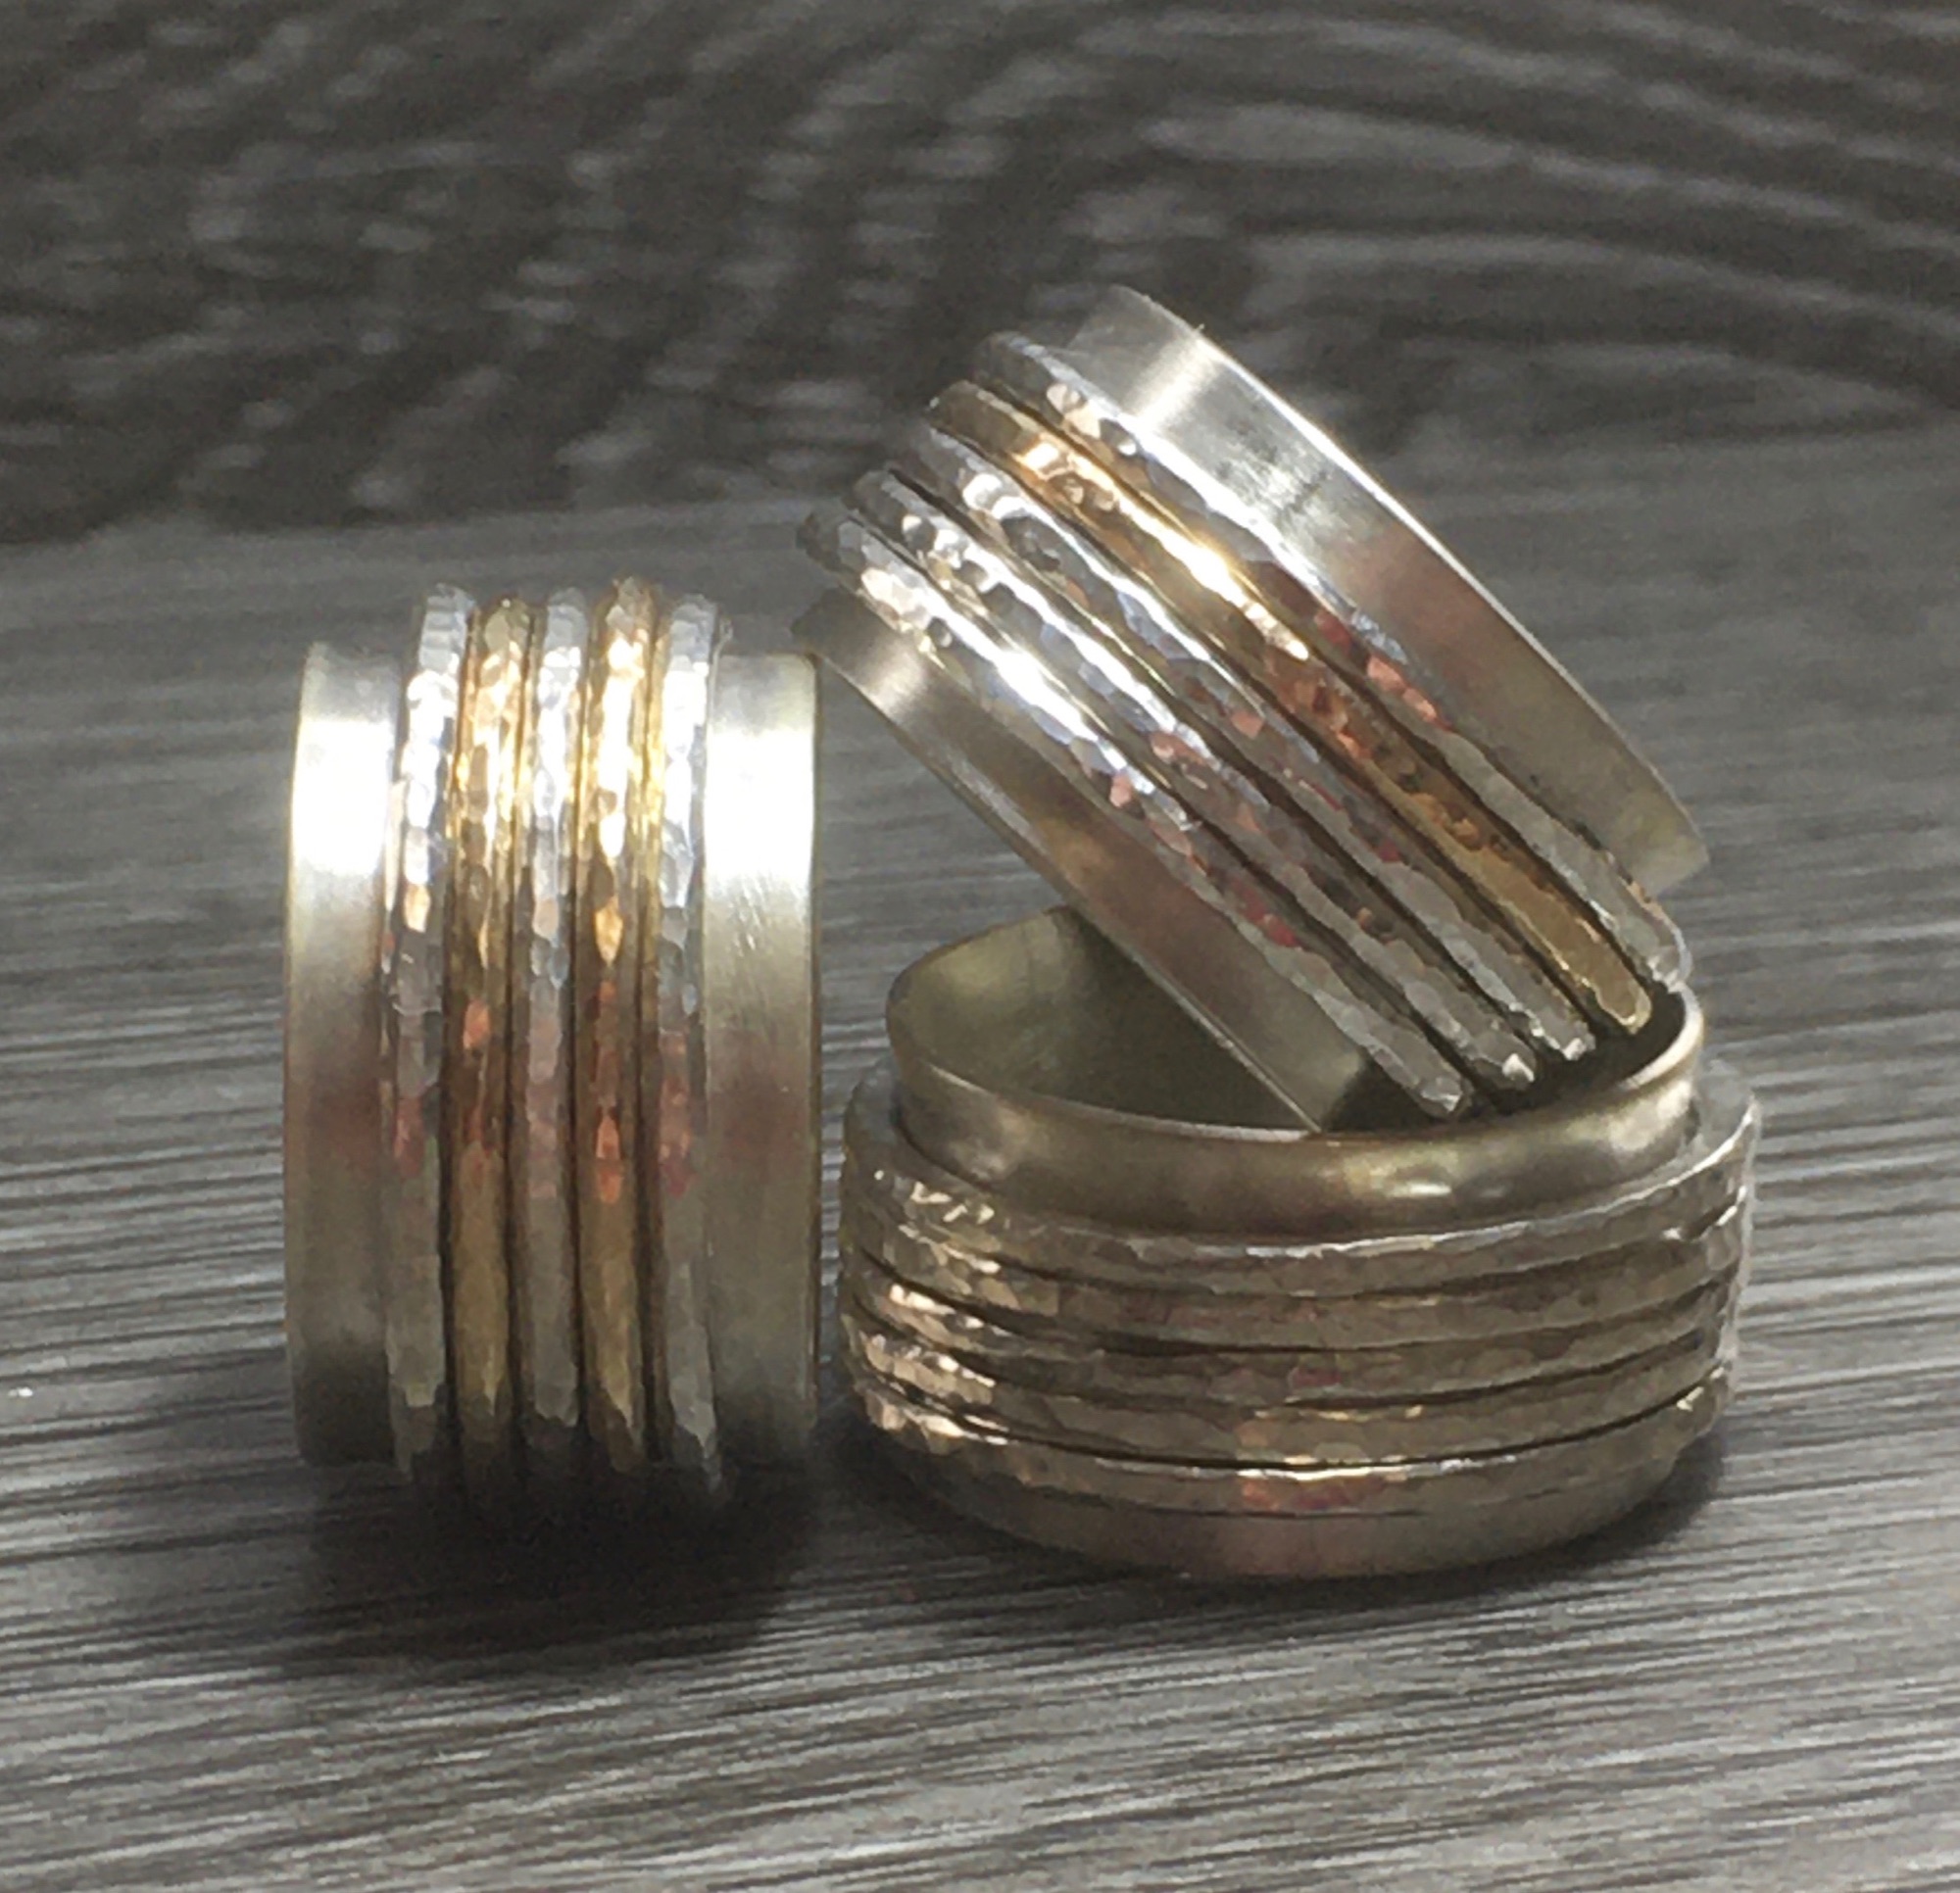 A stack of three sterling silver and yellow gold spinner rings, also known as yestling rings